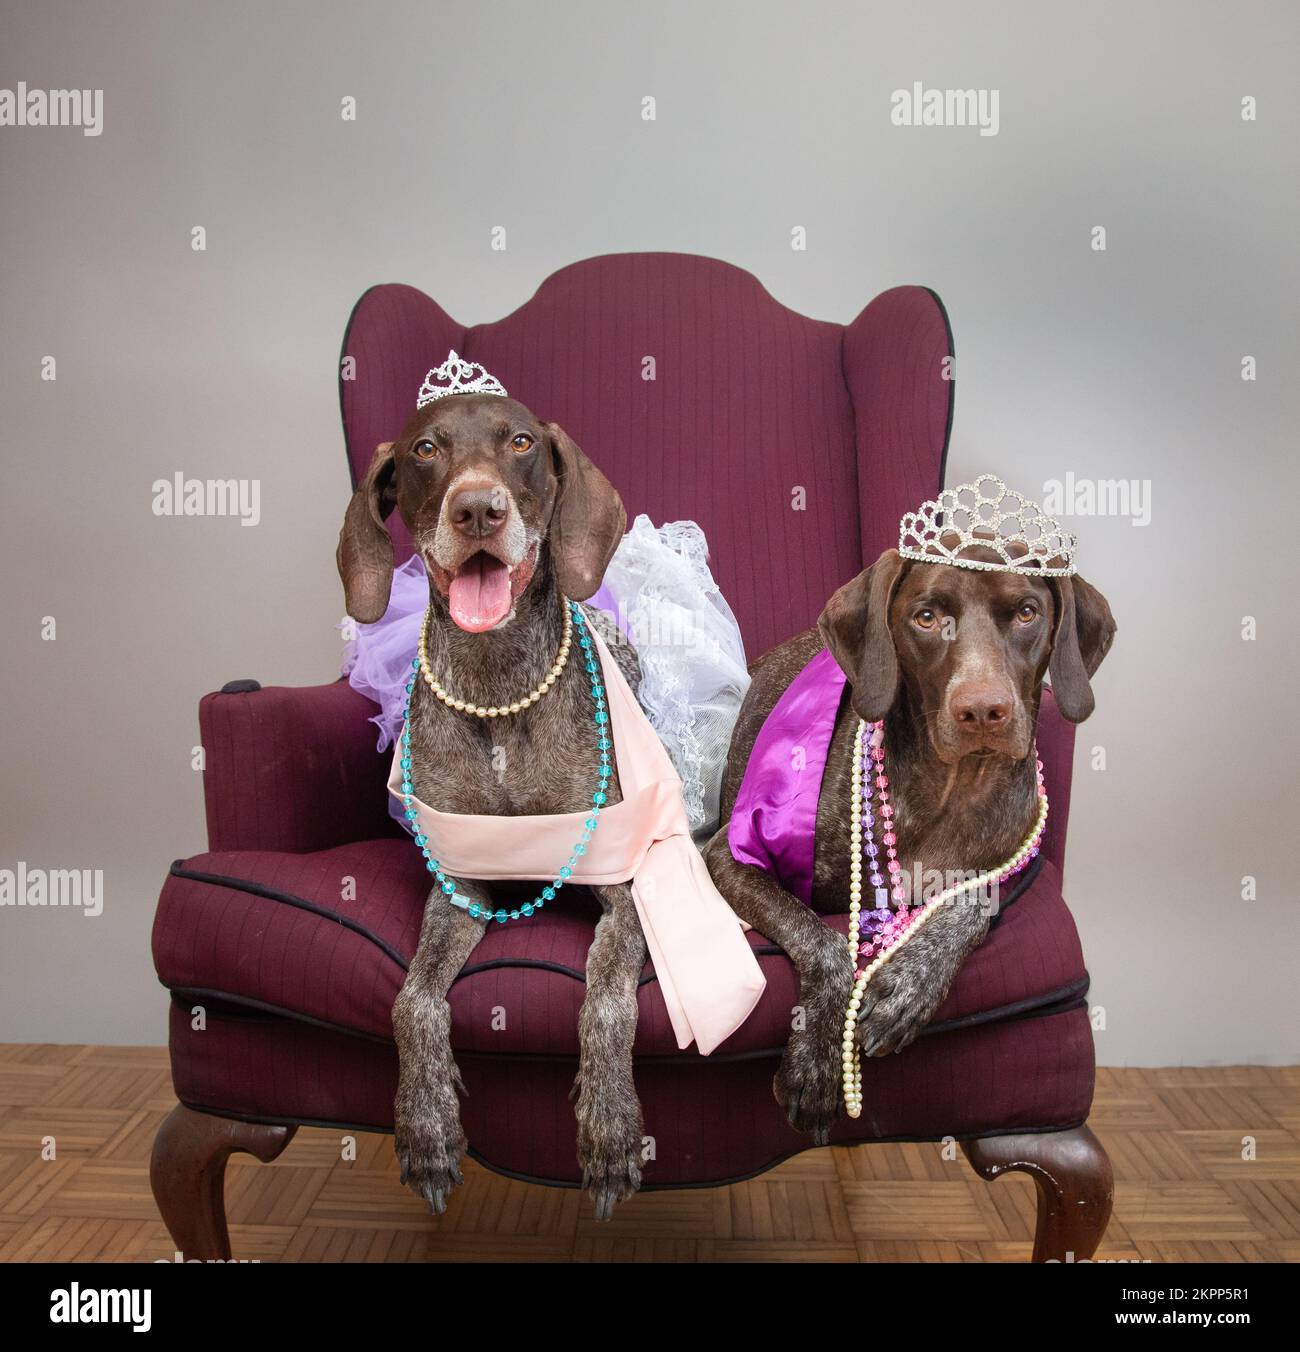 Two German shorthaired pointer dogs sitting on a chair dressed as princesses Stock Photo